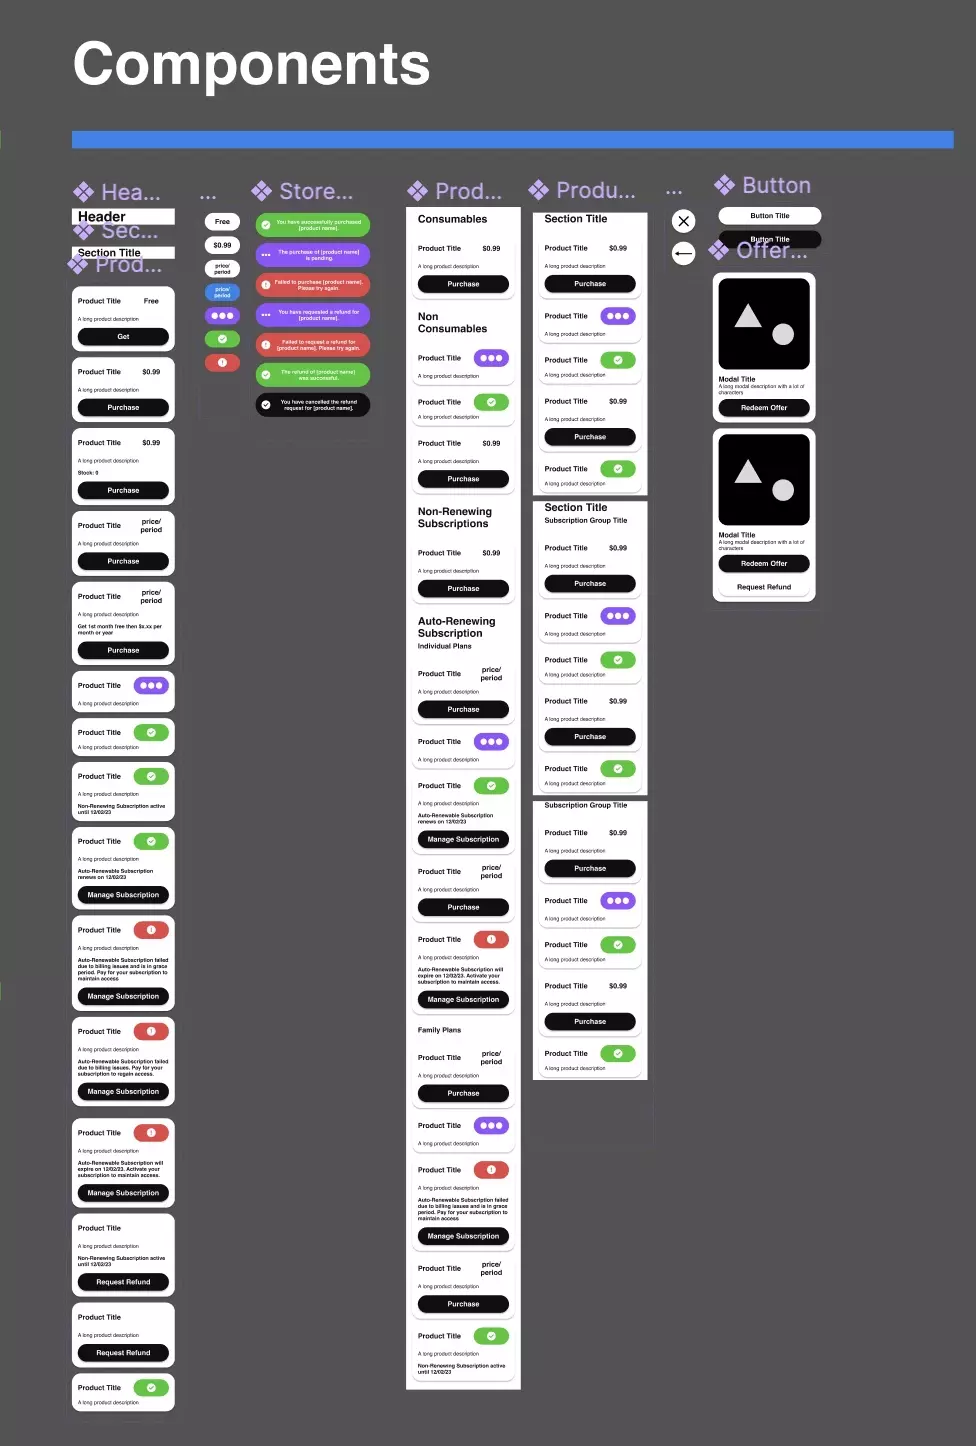 A screenshot of the Components within our free iOS e-commerce Figma design file.